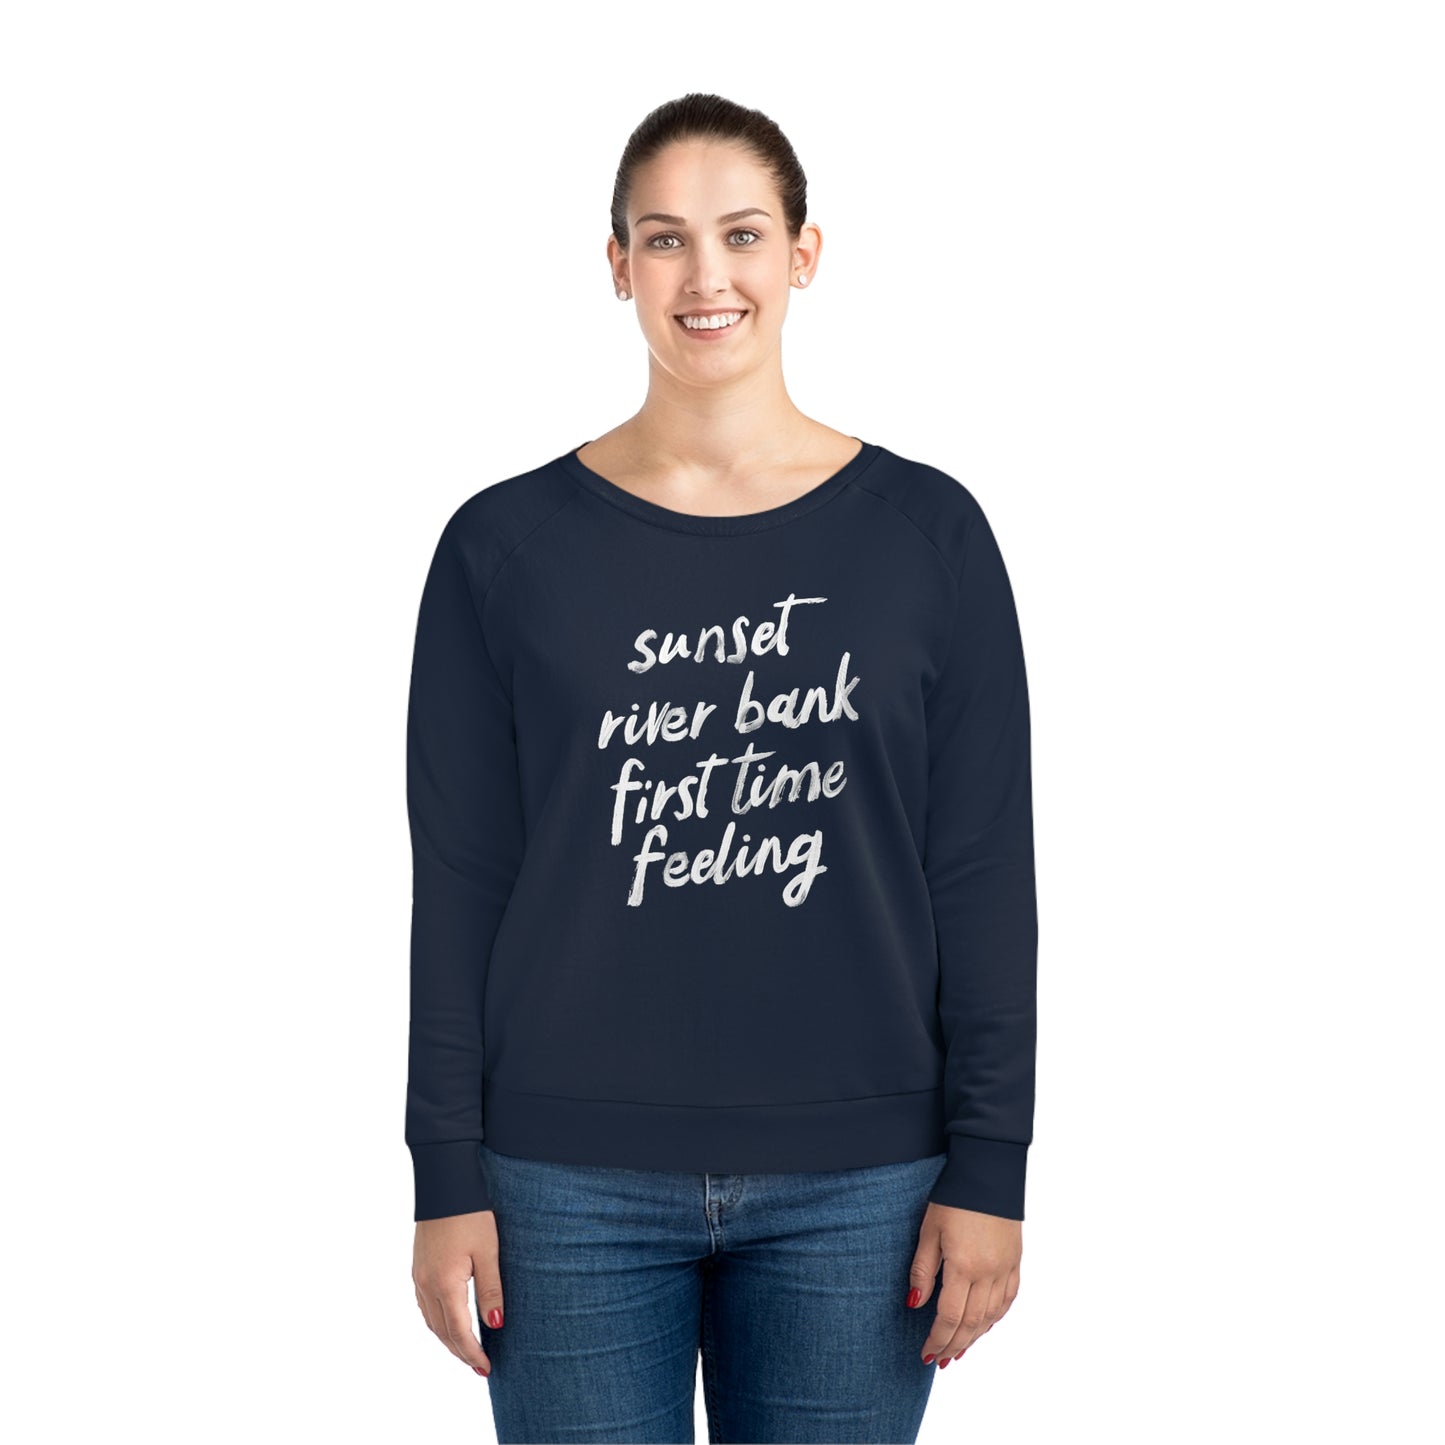 Fast Cars and Freedom-Women's Dazzler Relaxed Fit Sweatshirt